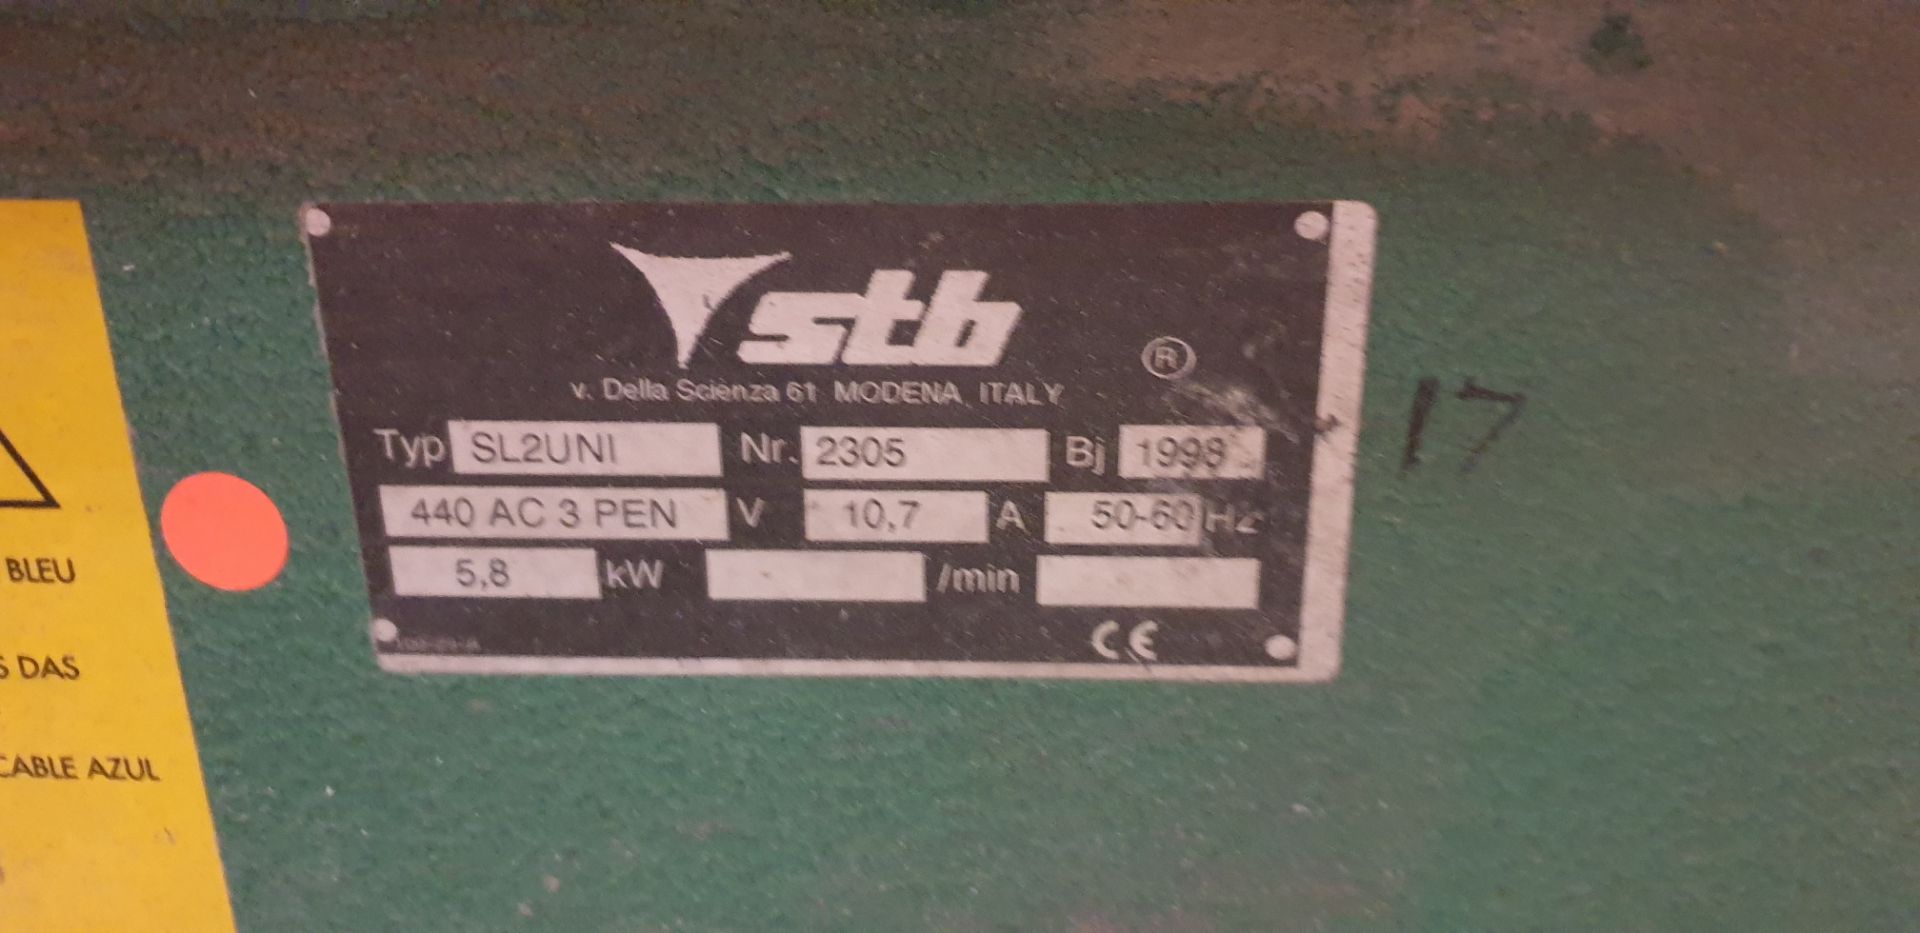 STB, SL2UNI, Twin Head Welder , Serial Number: 2305, Year of Manufacture: 1998 - Image 2 of 3